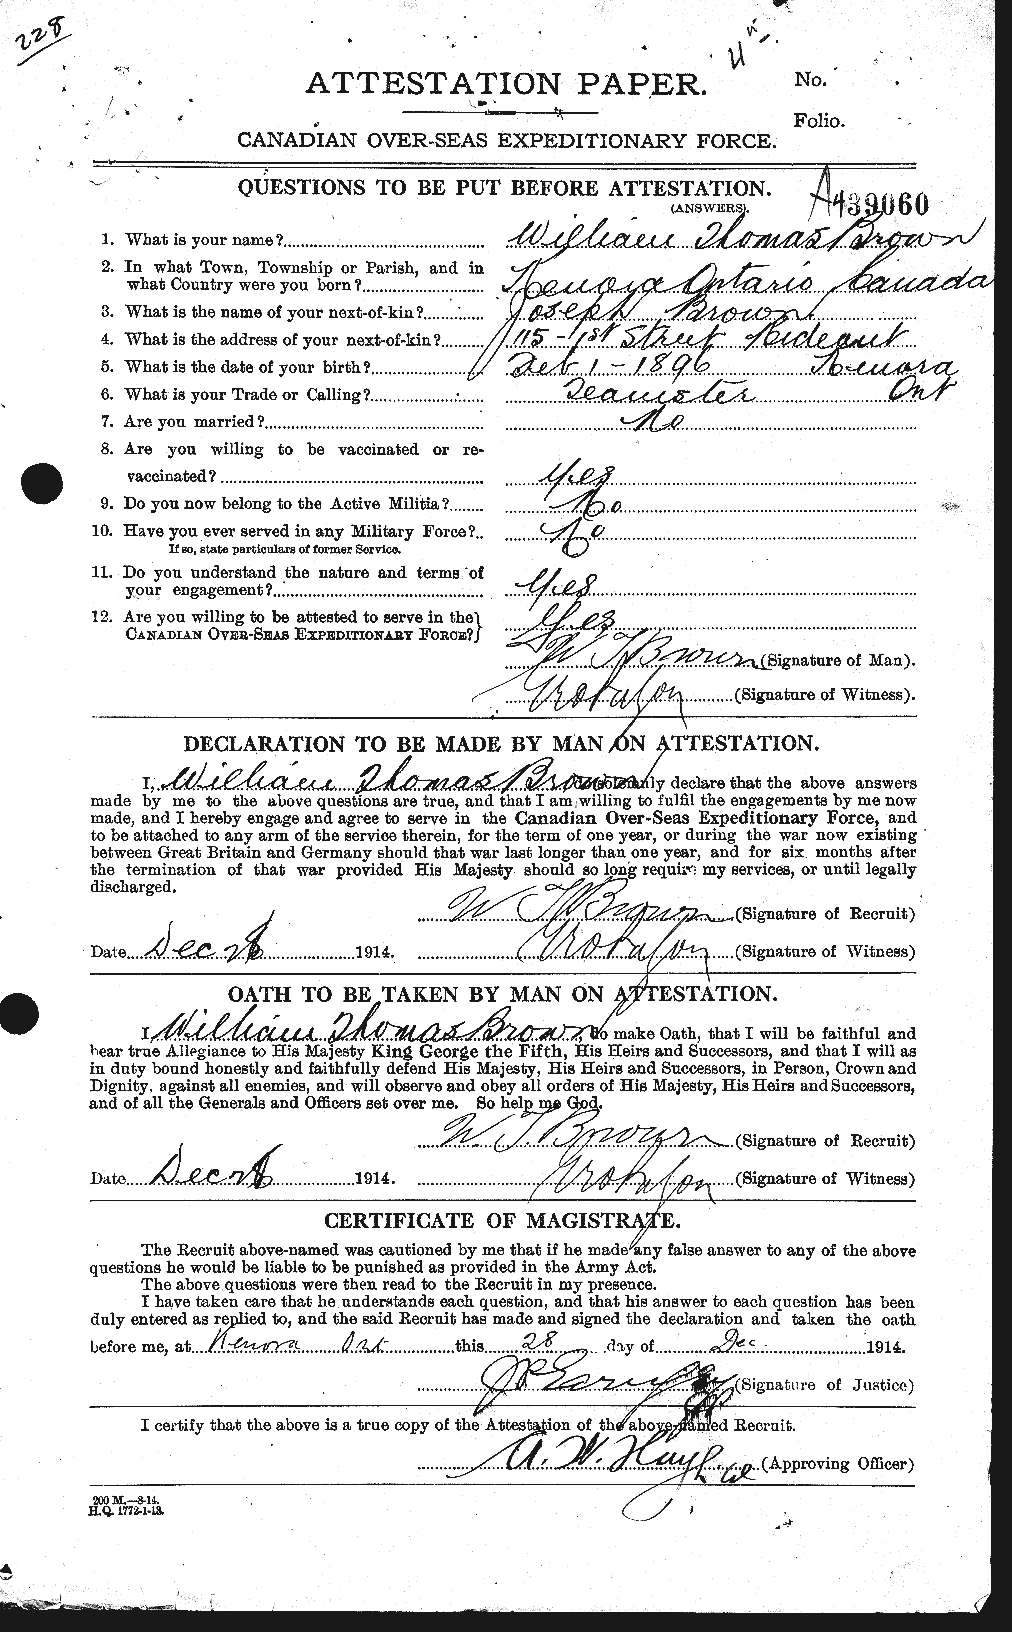 Personnel Records of the First World War - CEF 270887a